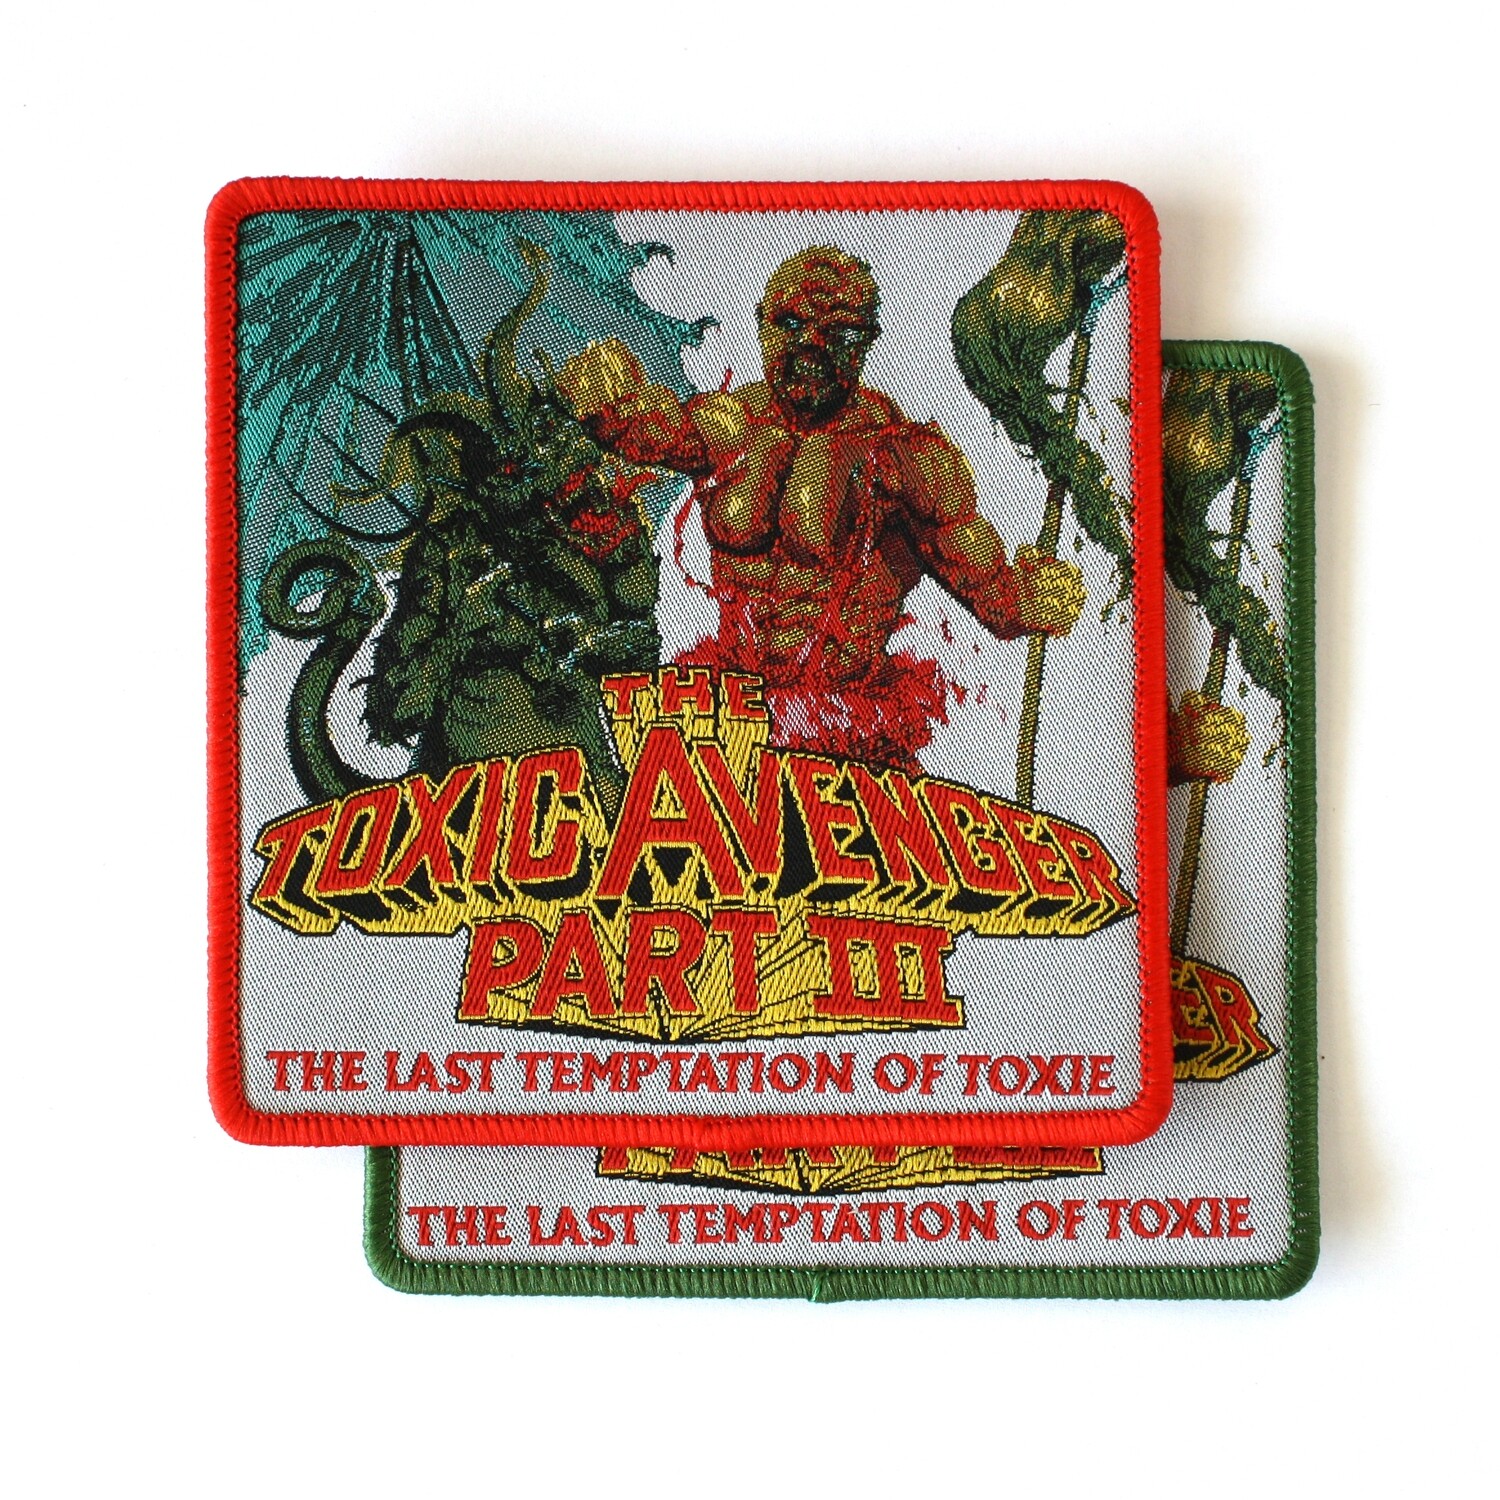 The Toxic Avenger Part III, Border Color: Green